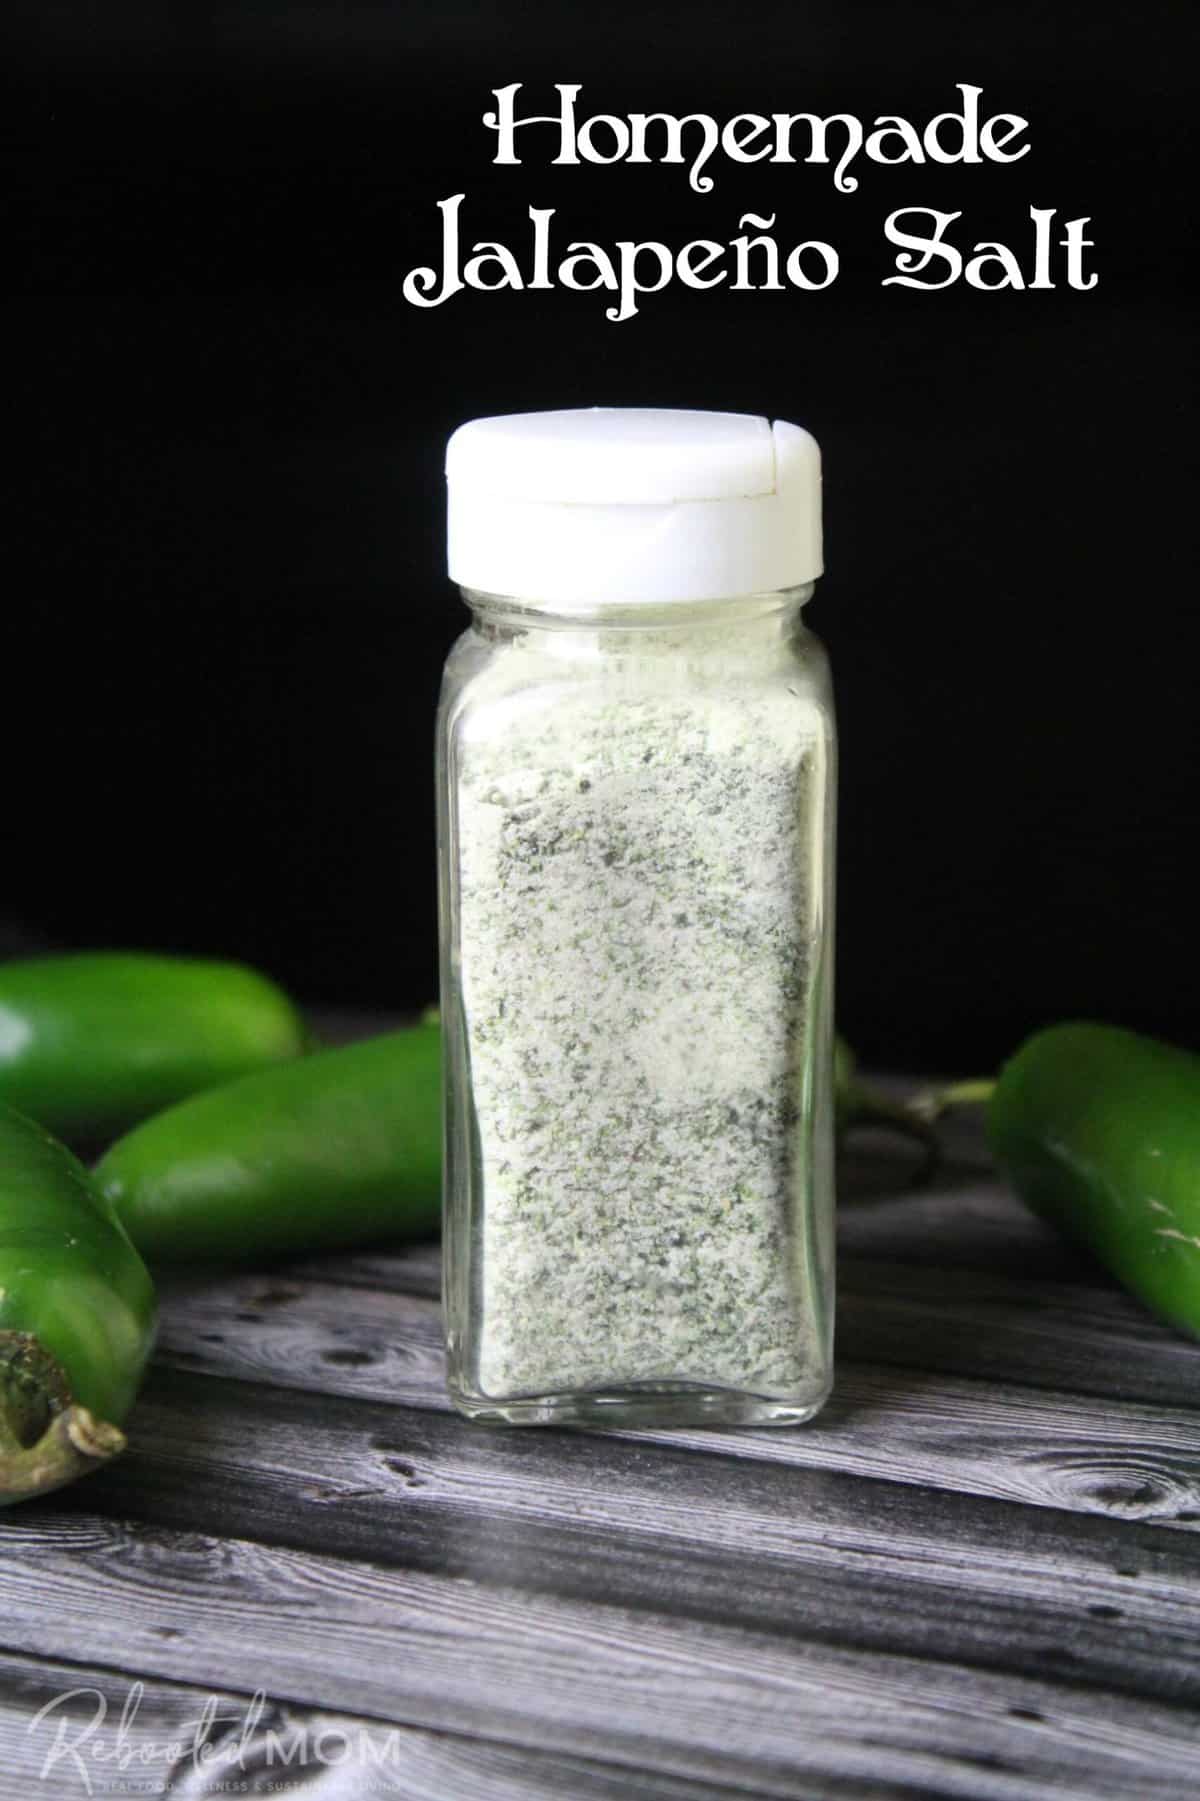  The aroma of freshly ground spices will fill your kitchen as you make this Jalapeno seasoning.